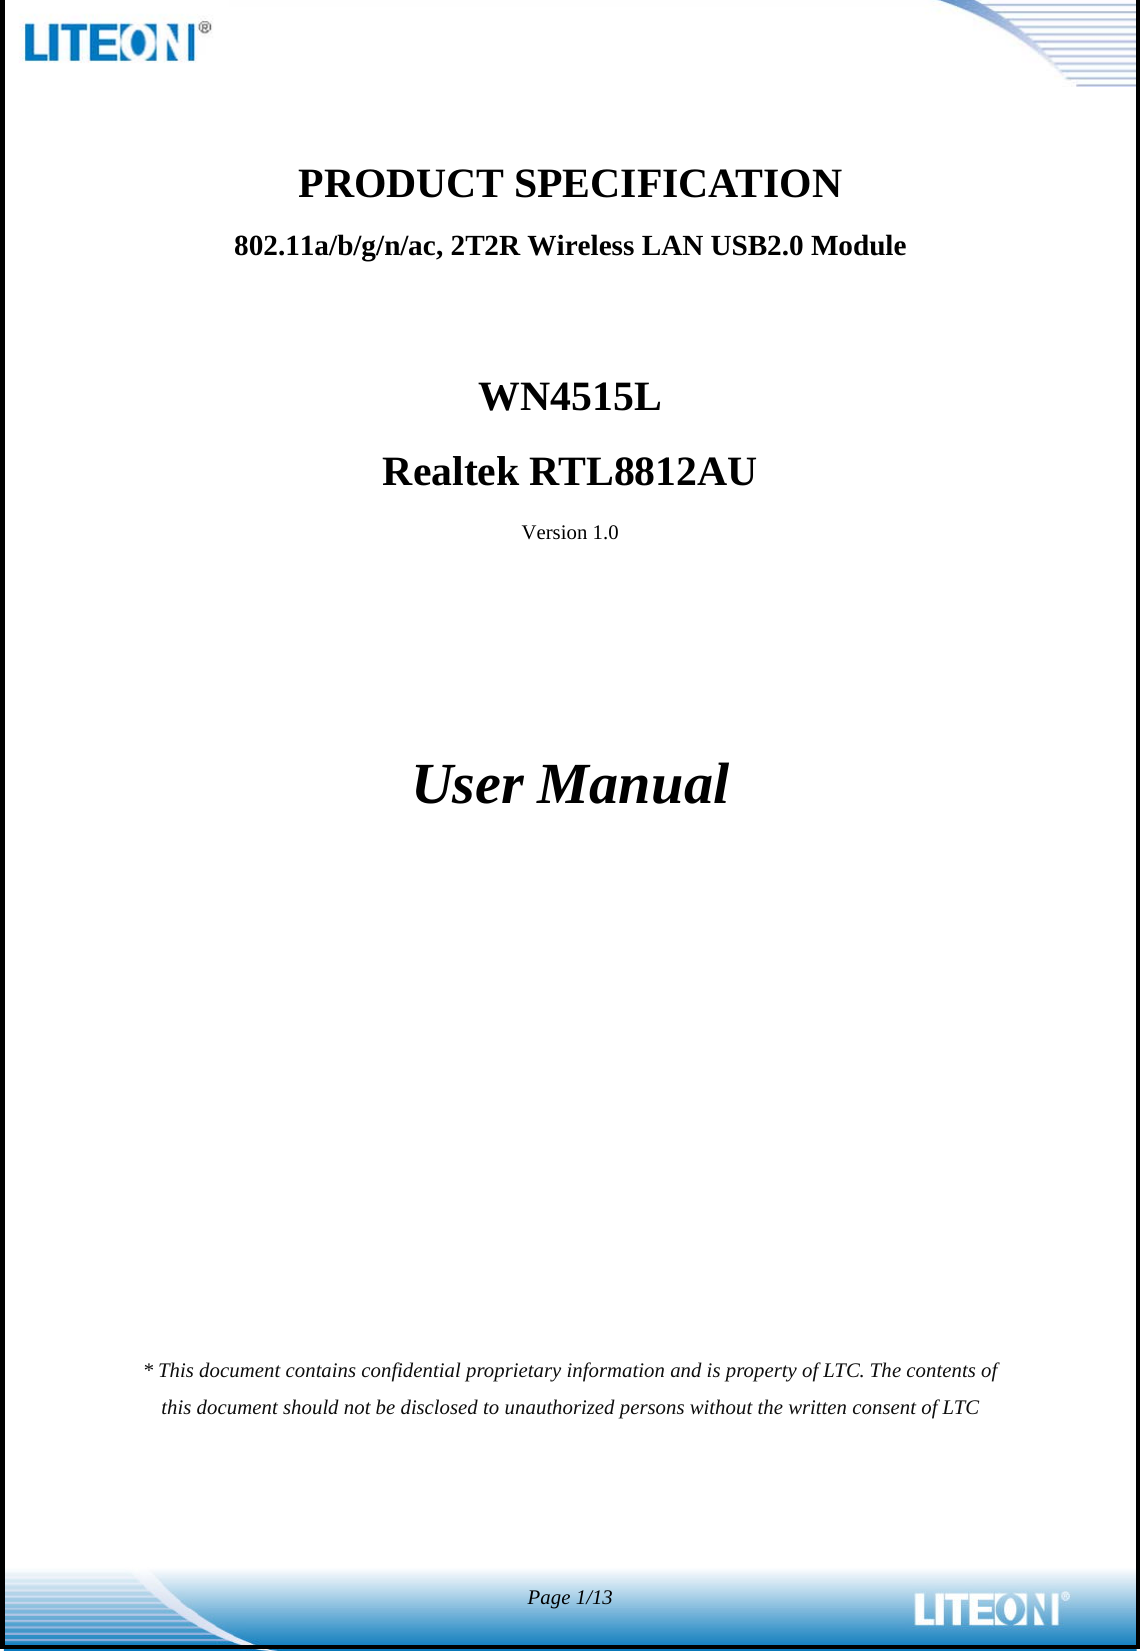  Page 1/13   PRODUCT SPECIFICATION 802.11a/b/g/n/ac, 2T2R Wireless LAN USB2.0 Module    WN4515L Realtek RTL8812AU Version 1.0      User Manual               * This document contains confidential proprietary information and is property of LTC. The contents of this document should not be disclosed to unauthorized persons without the written consent of LTC 